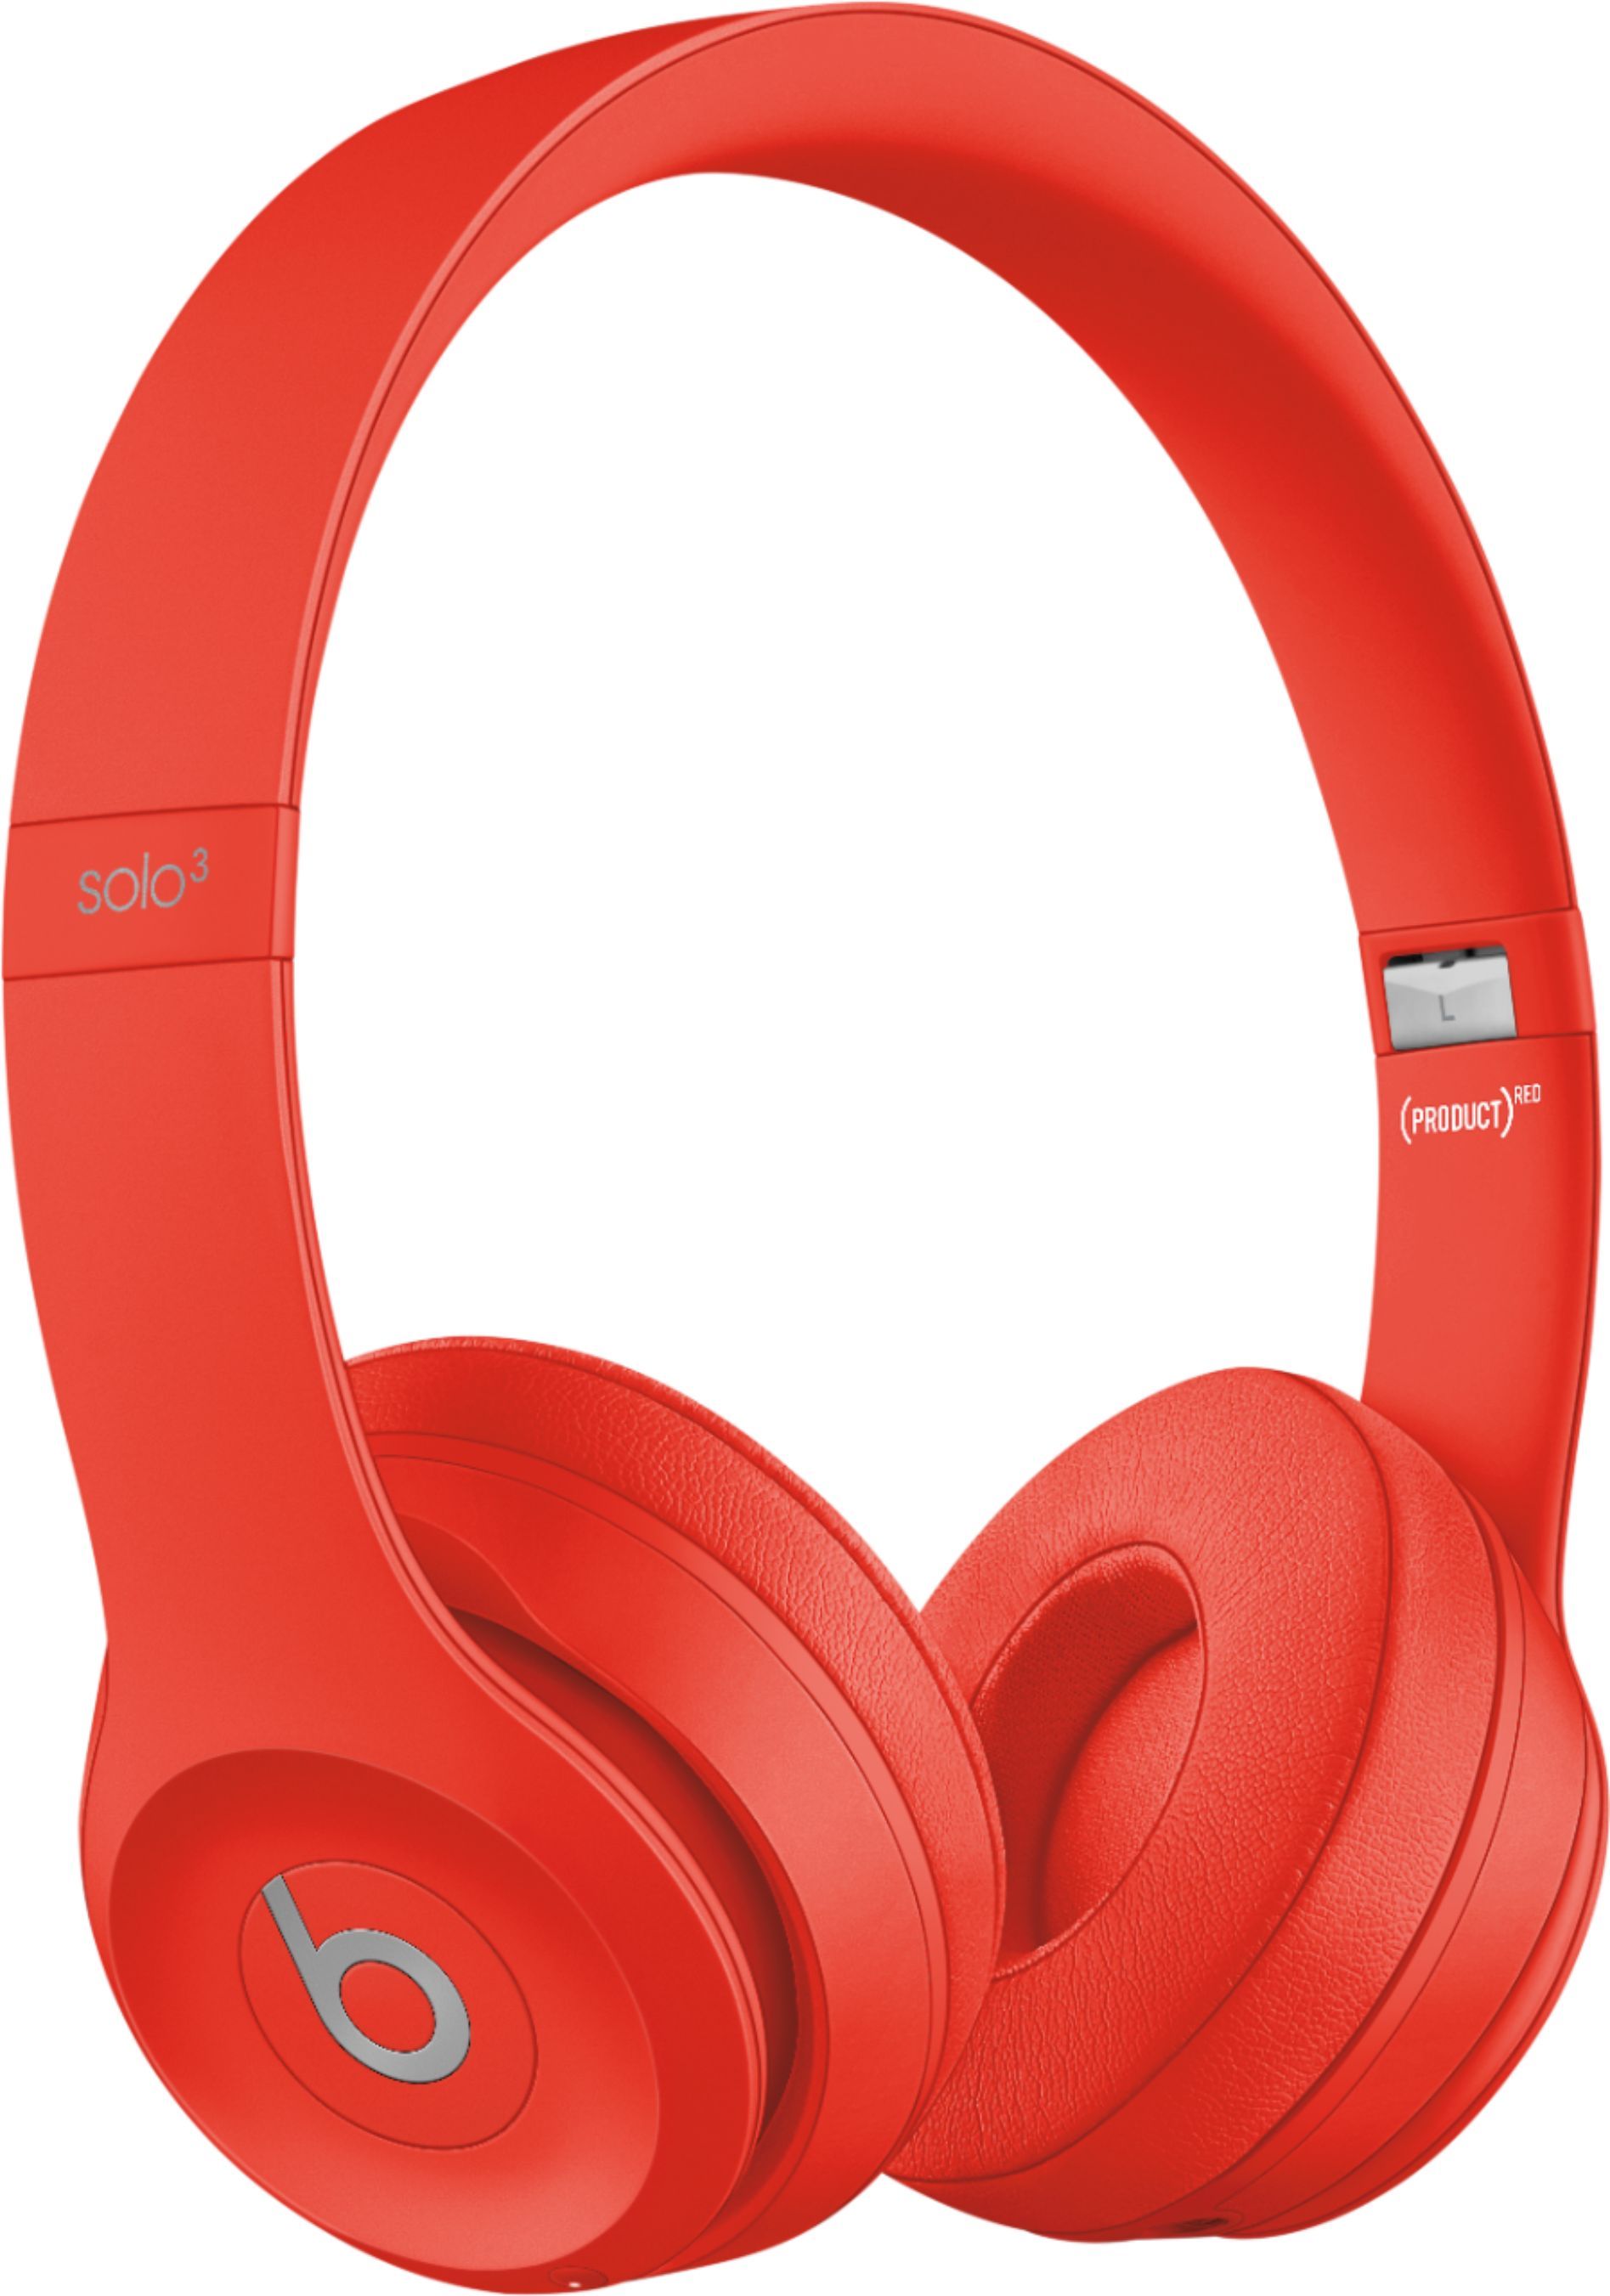 Beats Solo³ Wireless On-Ear Headphones (PRODUCT)RED Citrus Red MX472LL/A - Best Buy | Best Buy U.S.